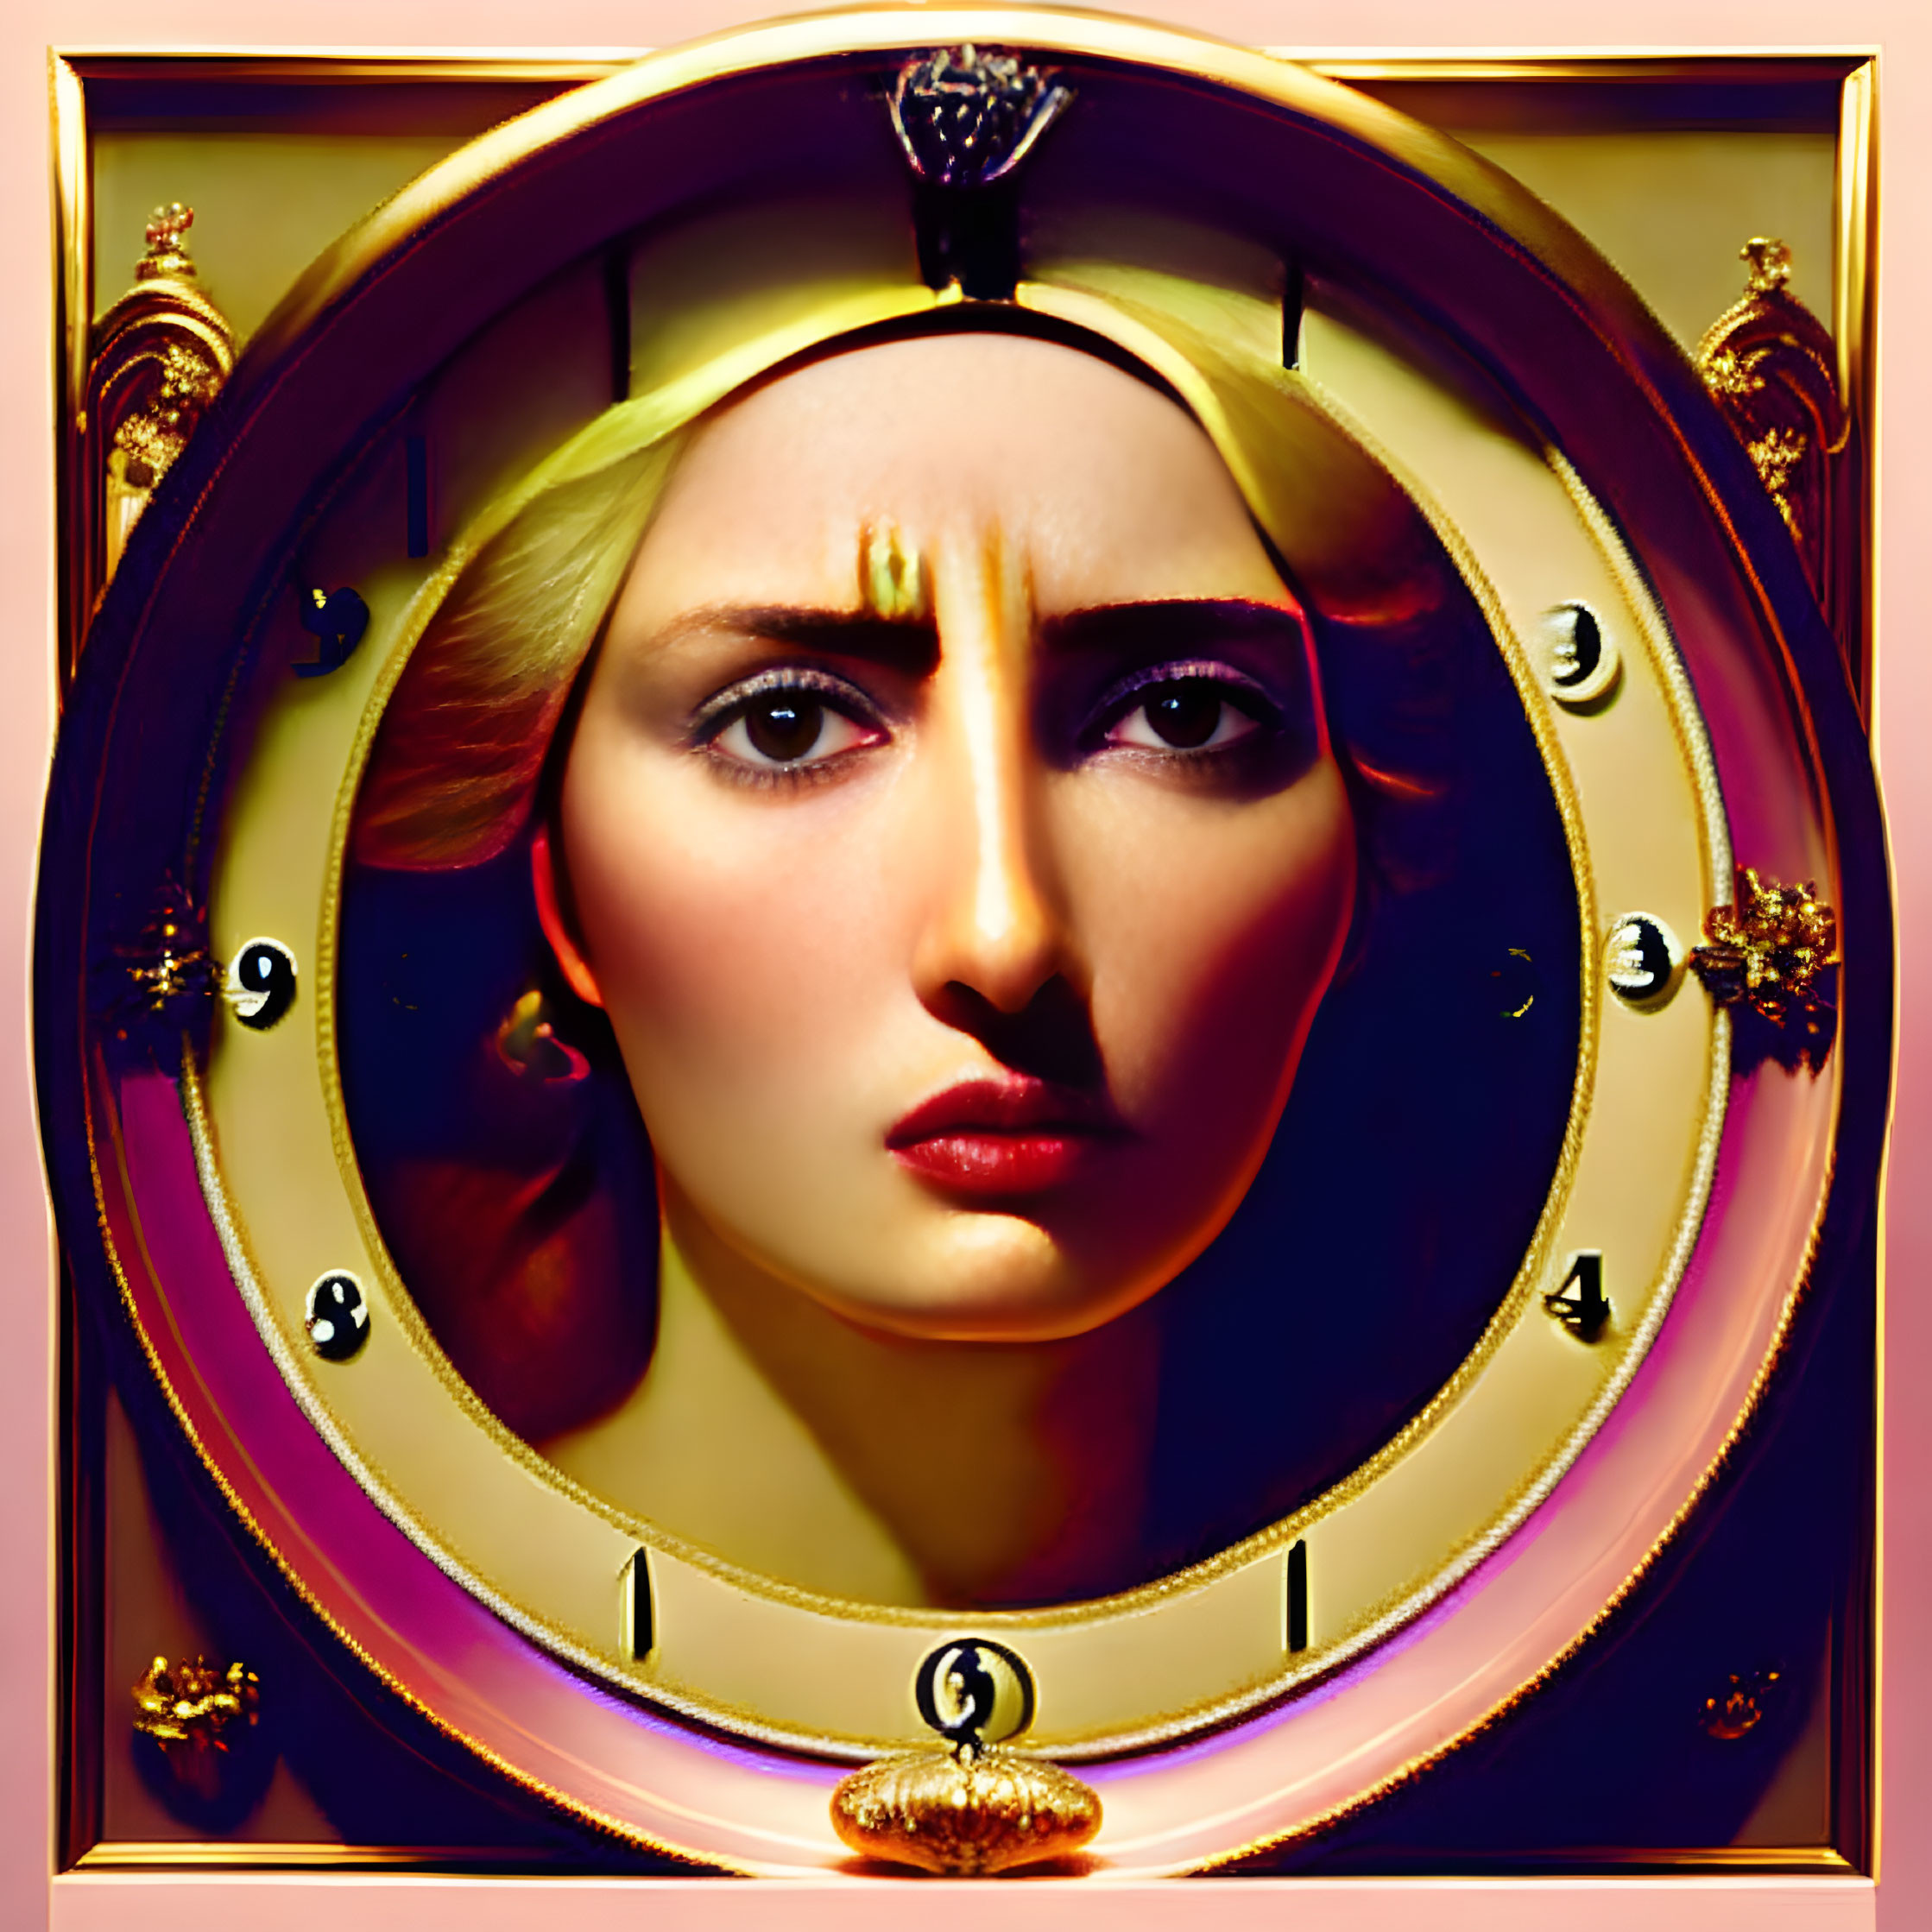 Surreal digital artwork of woman's face on clock with distorted numbers